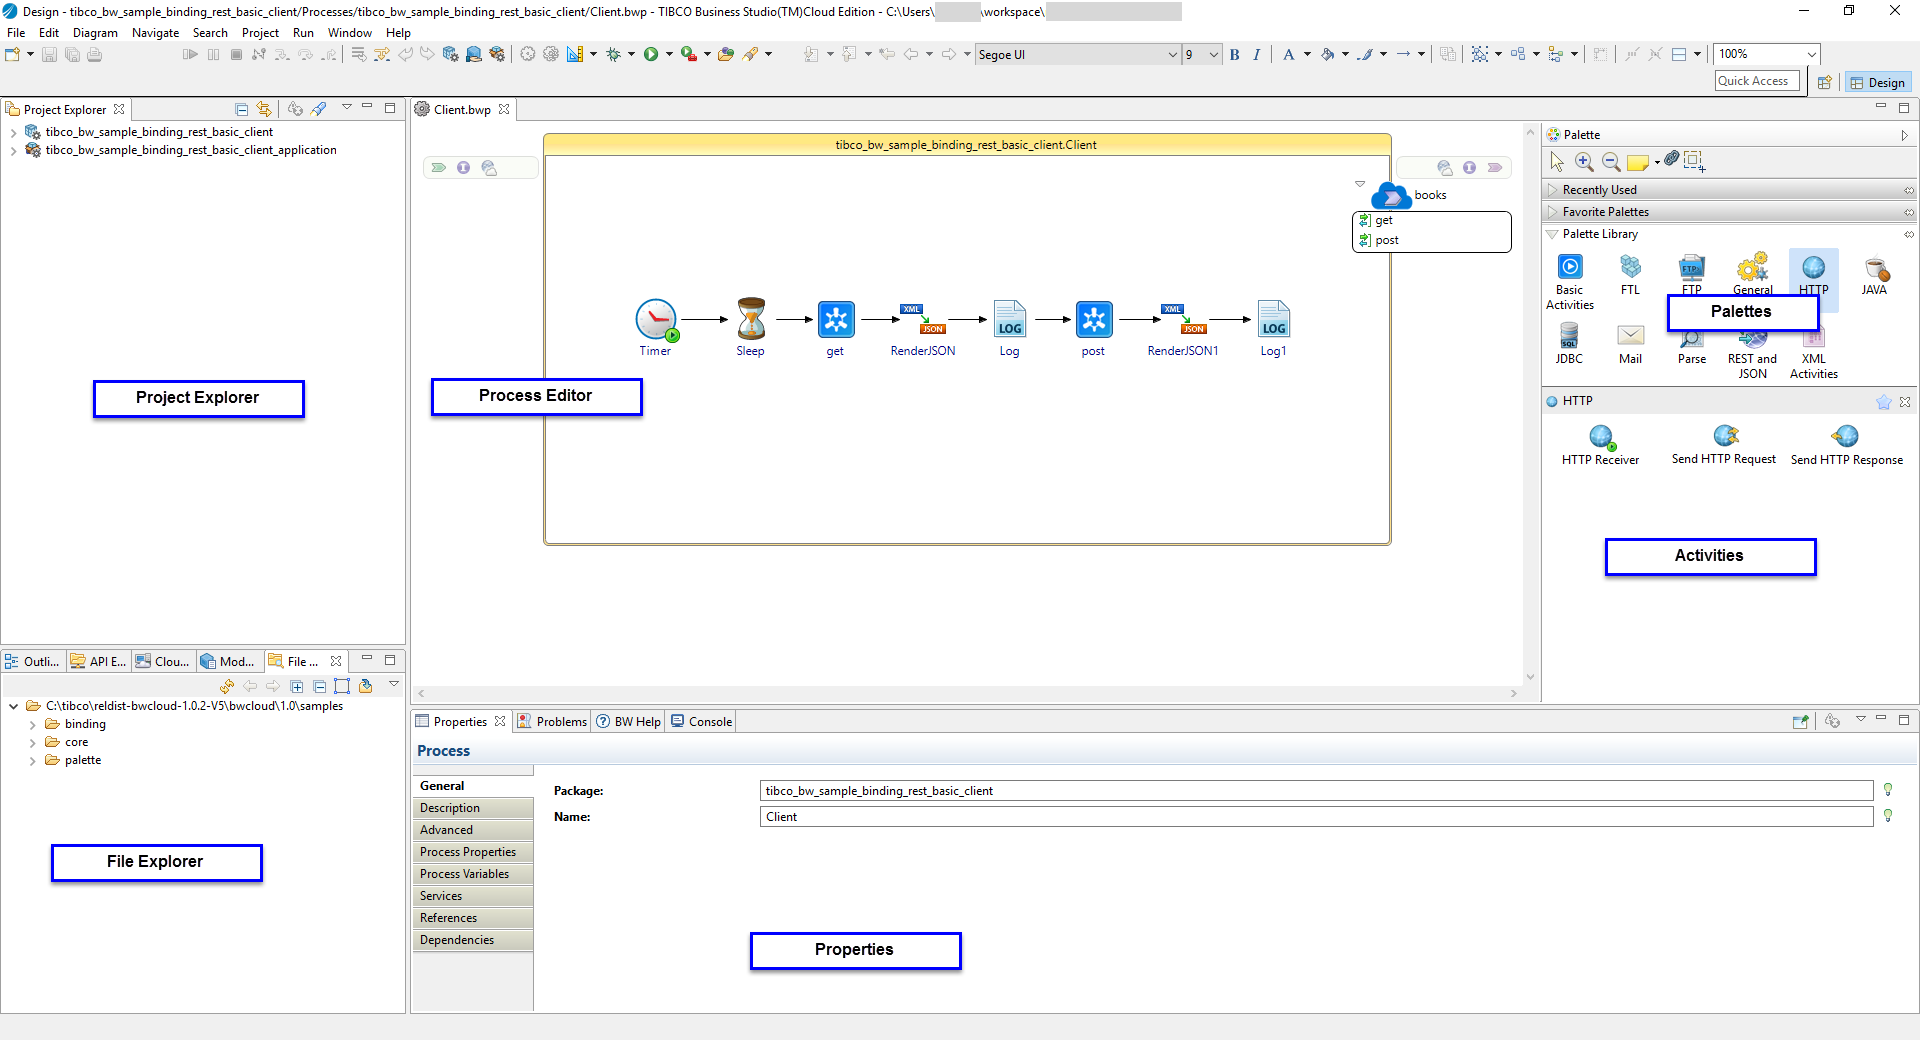 Picture of TIBCO Business Studio tools.